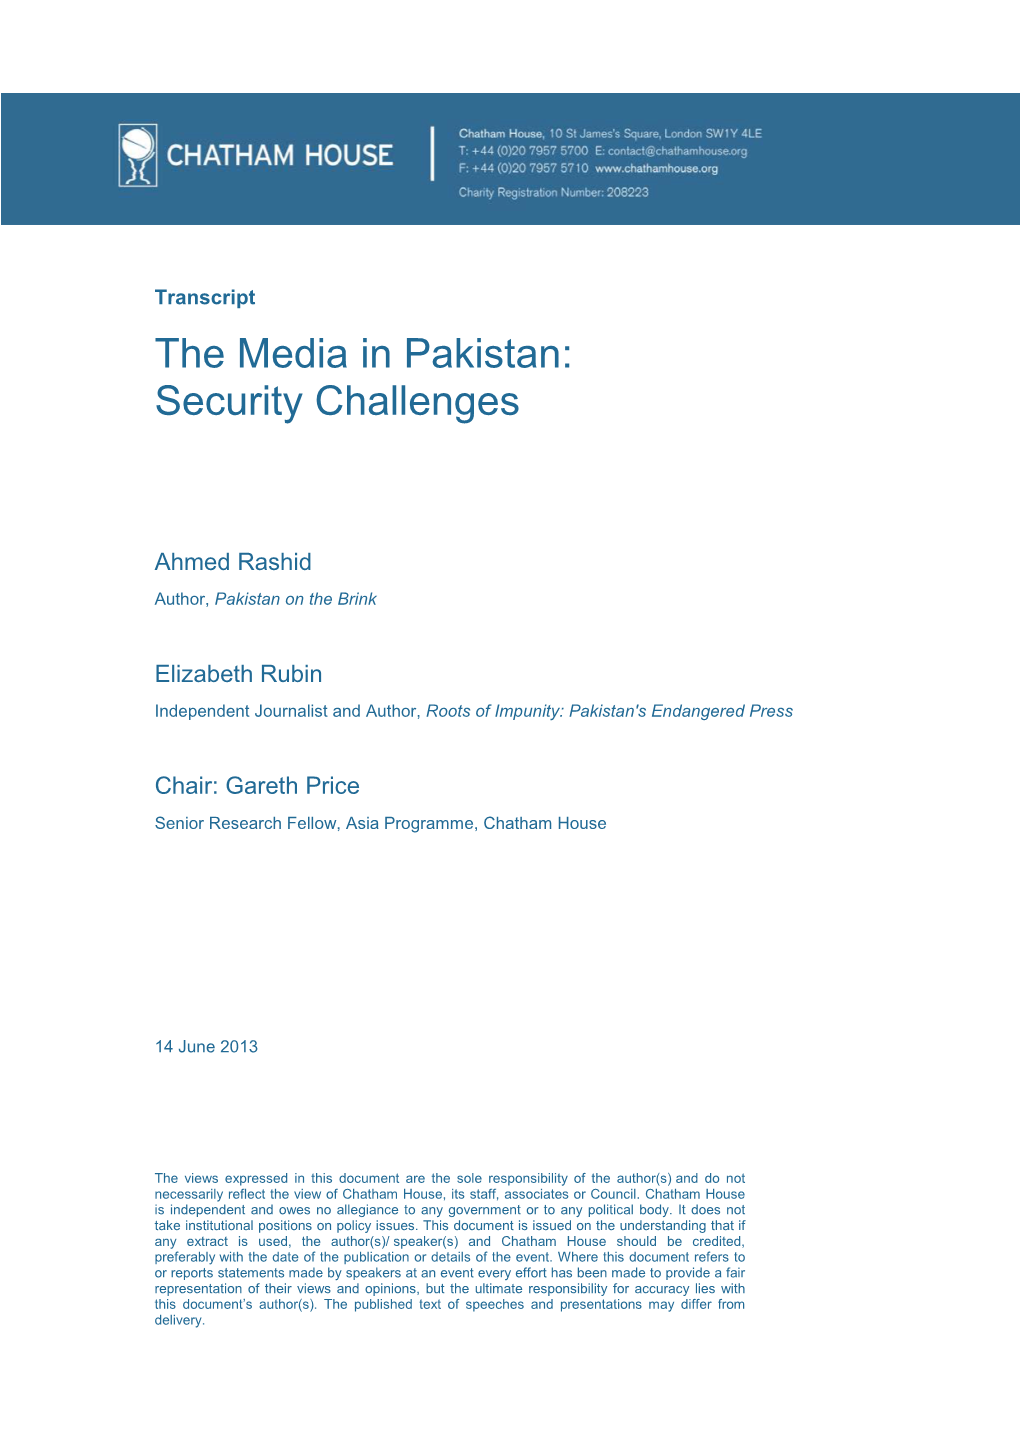 The Media in Pakistan: Security Challenges